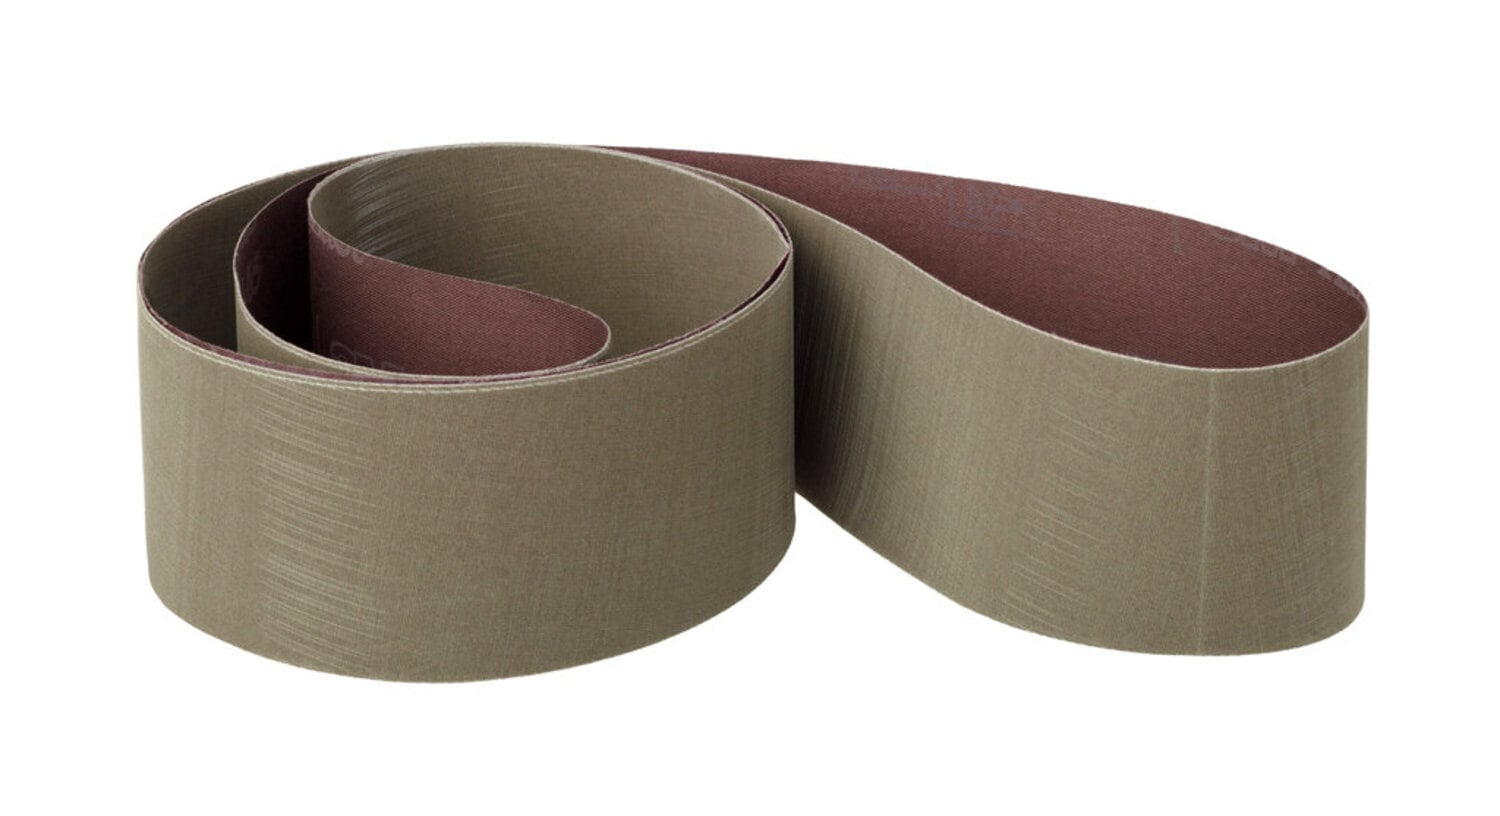 7100189768 - 3M Trizact Cloth Belt 307EA, 3/32 in x32 in, A100 JE-weight, 50/Pac,
200 ea/Case